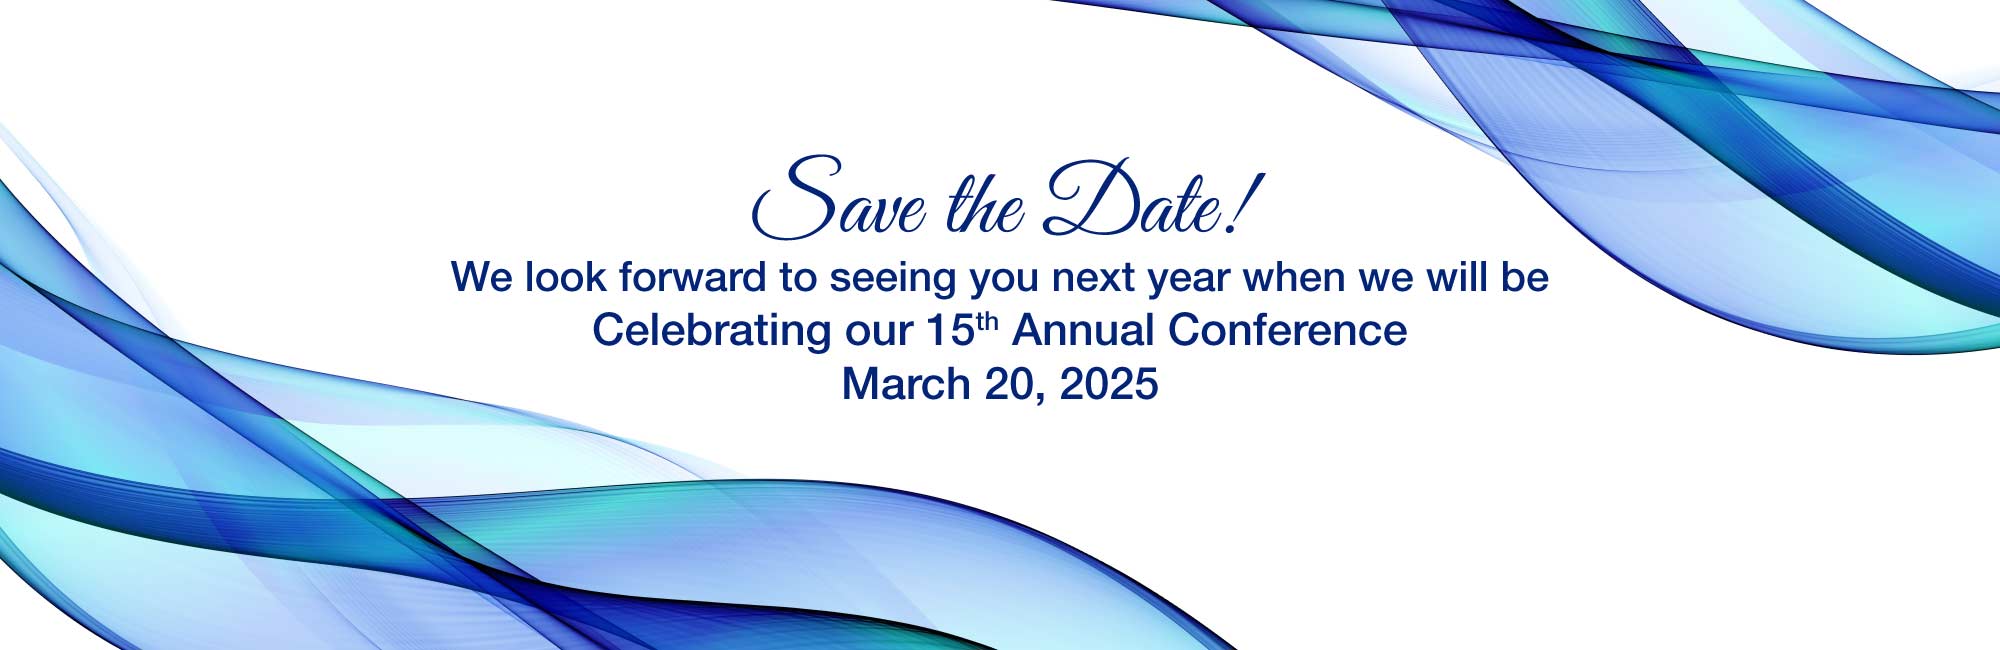 Save the Date! We look forward to seeing you next year when we will be Celebrating our 15th Annual Conference March 20, 2025